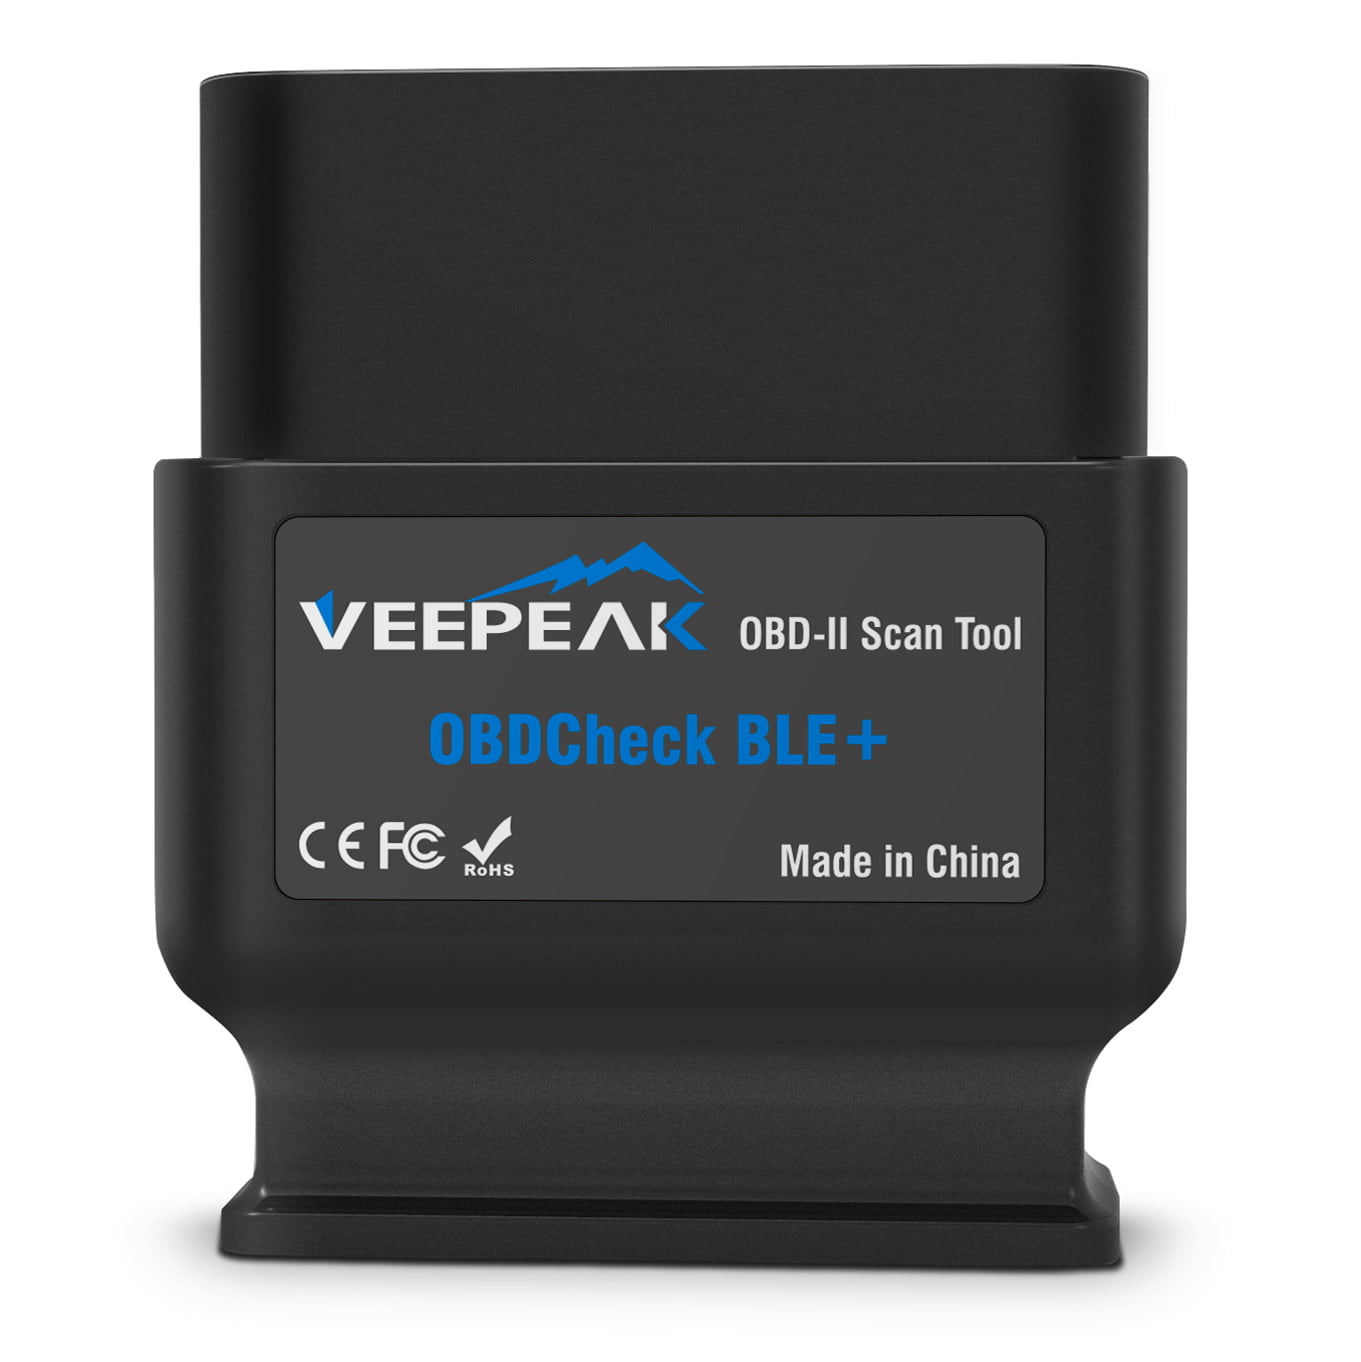 The Veepeak OBDCheck BLE+ is compatible with various apps